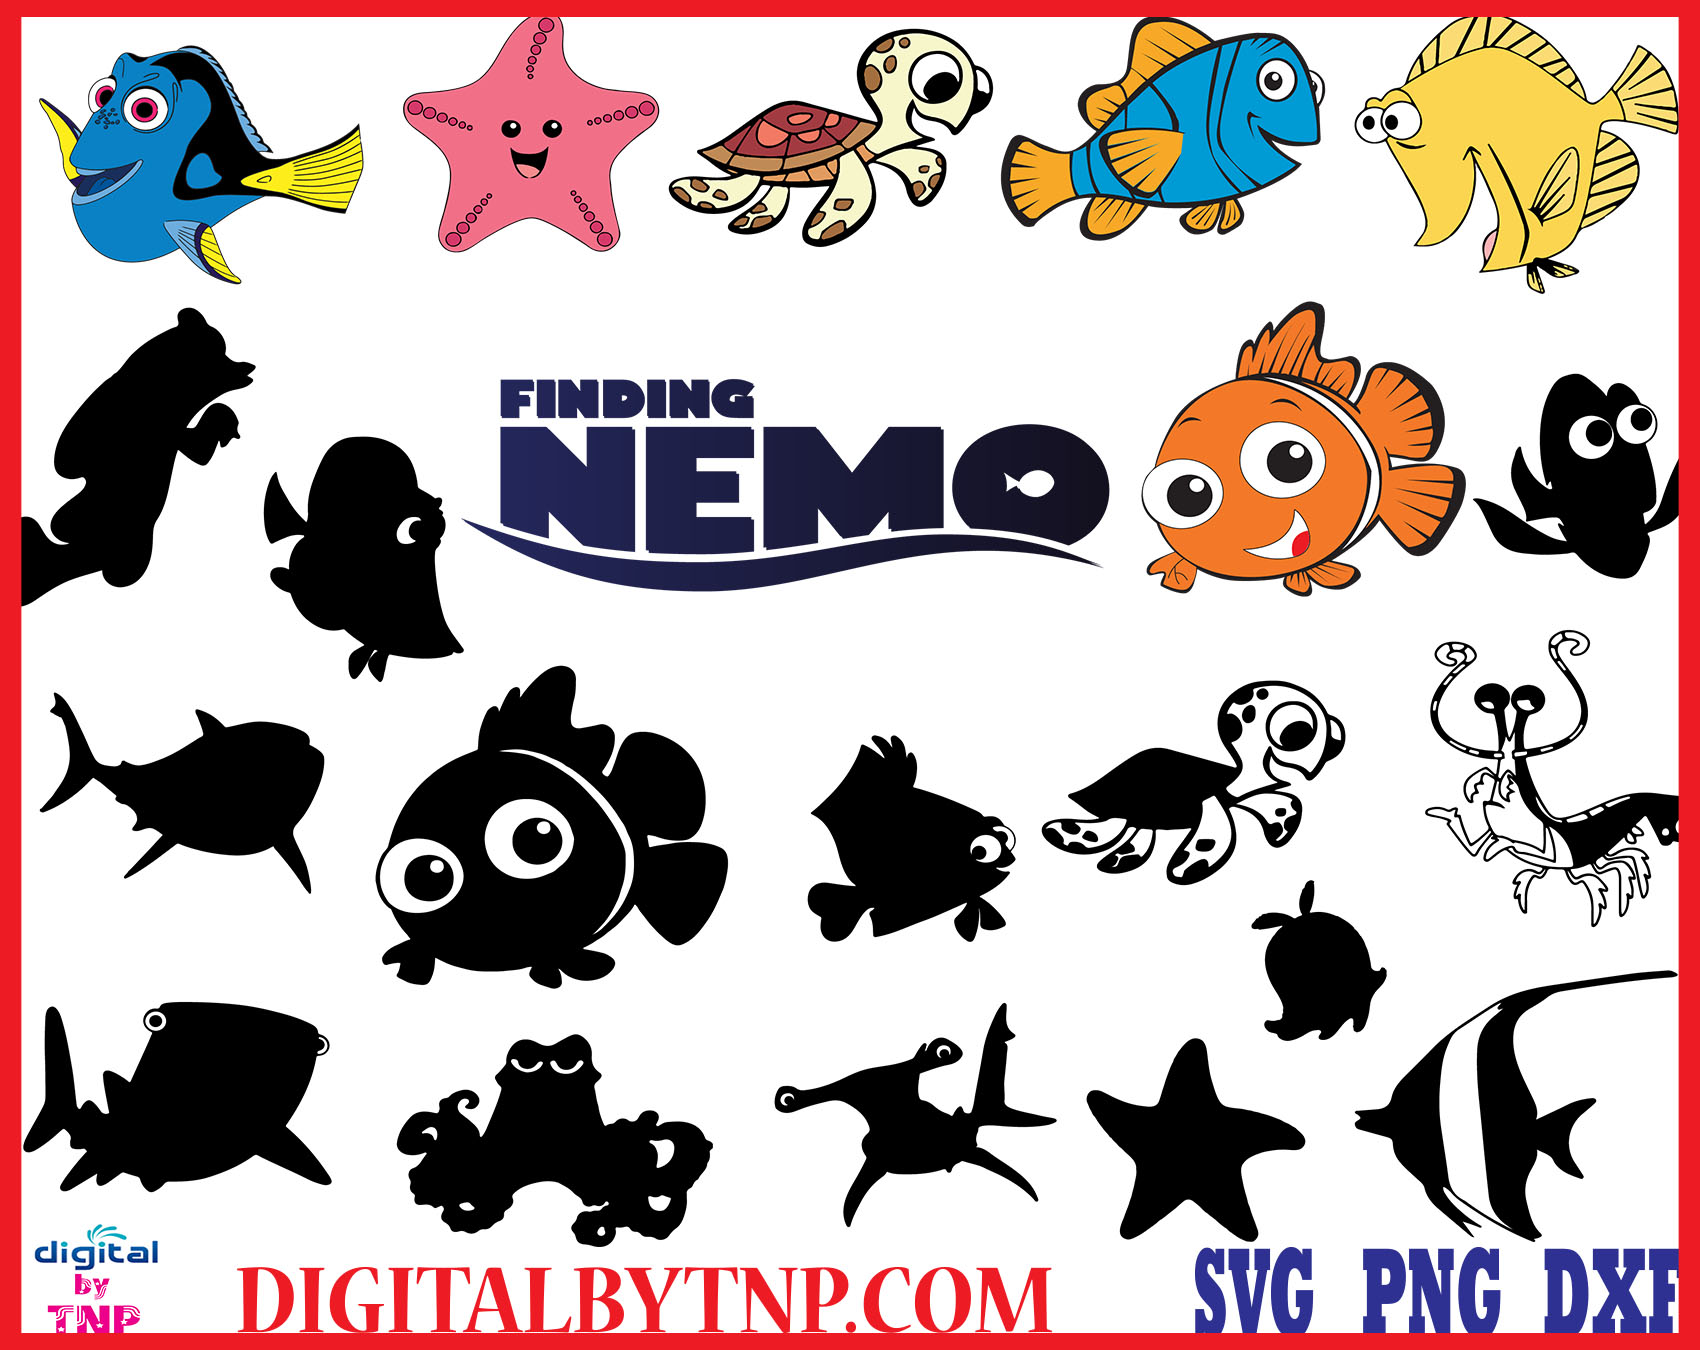 Download Finding Nemo Svg Bundle Eps Dxf Png Files Nemo Svg Dorys Svg Marlin Clipart Cricut File Svg Svg Png Dxf Finding Dorys Svg Customer Satisfaction Is Our Priority